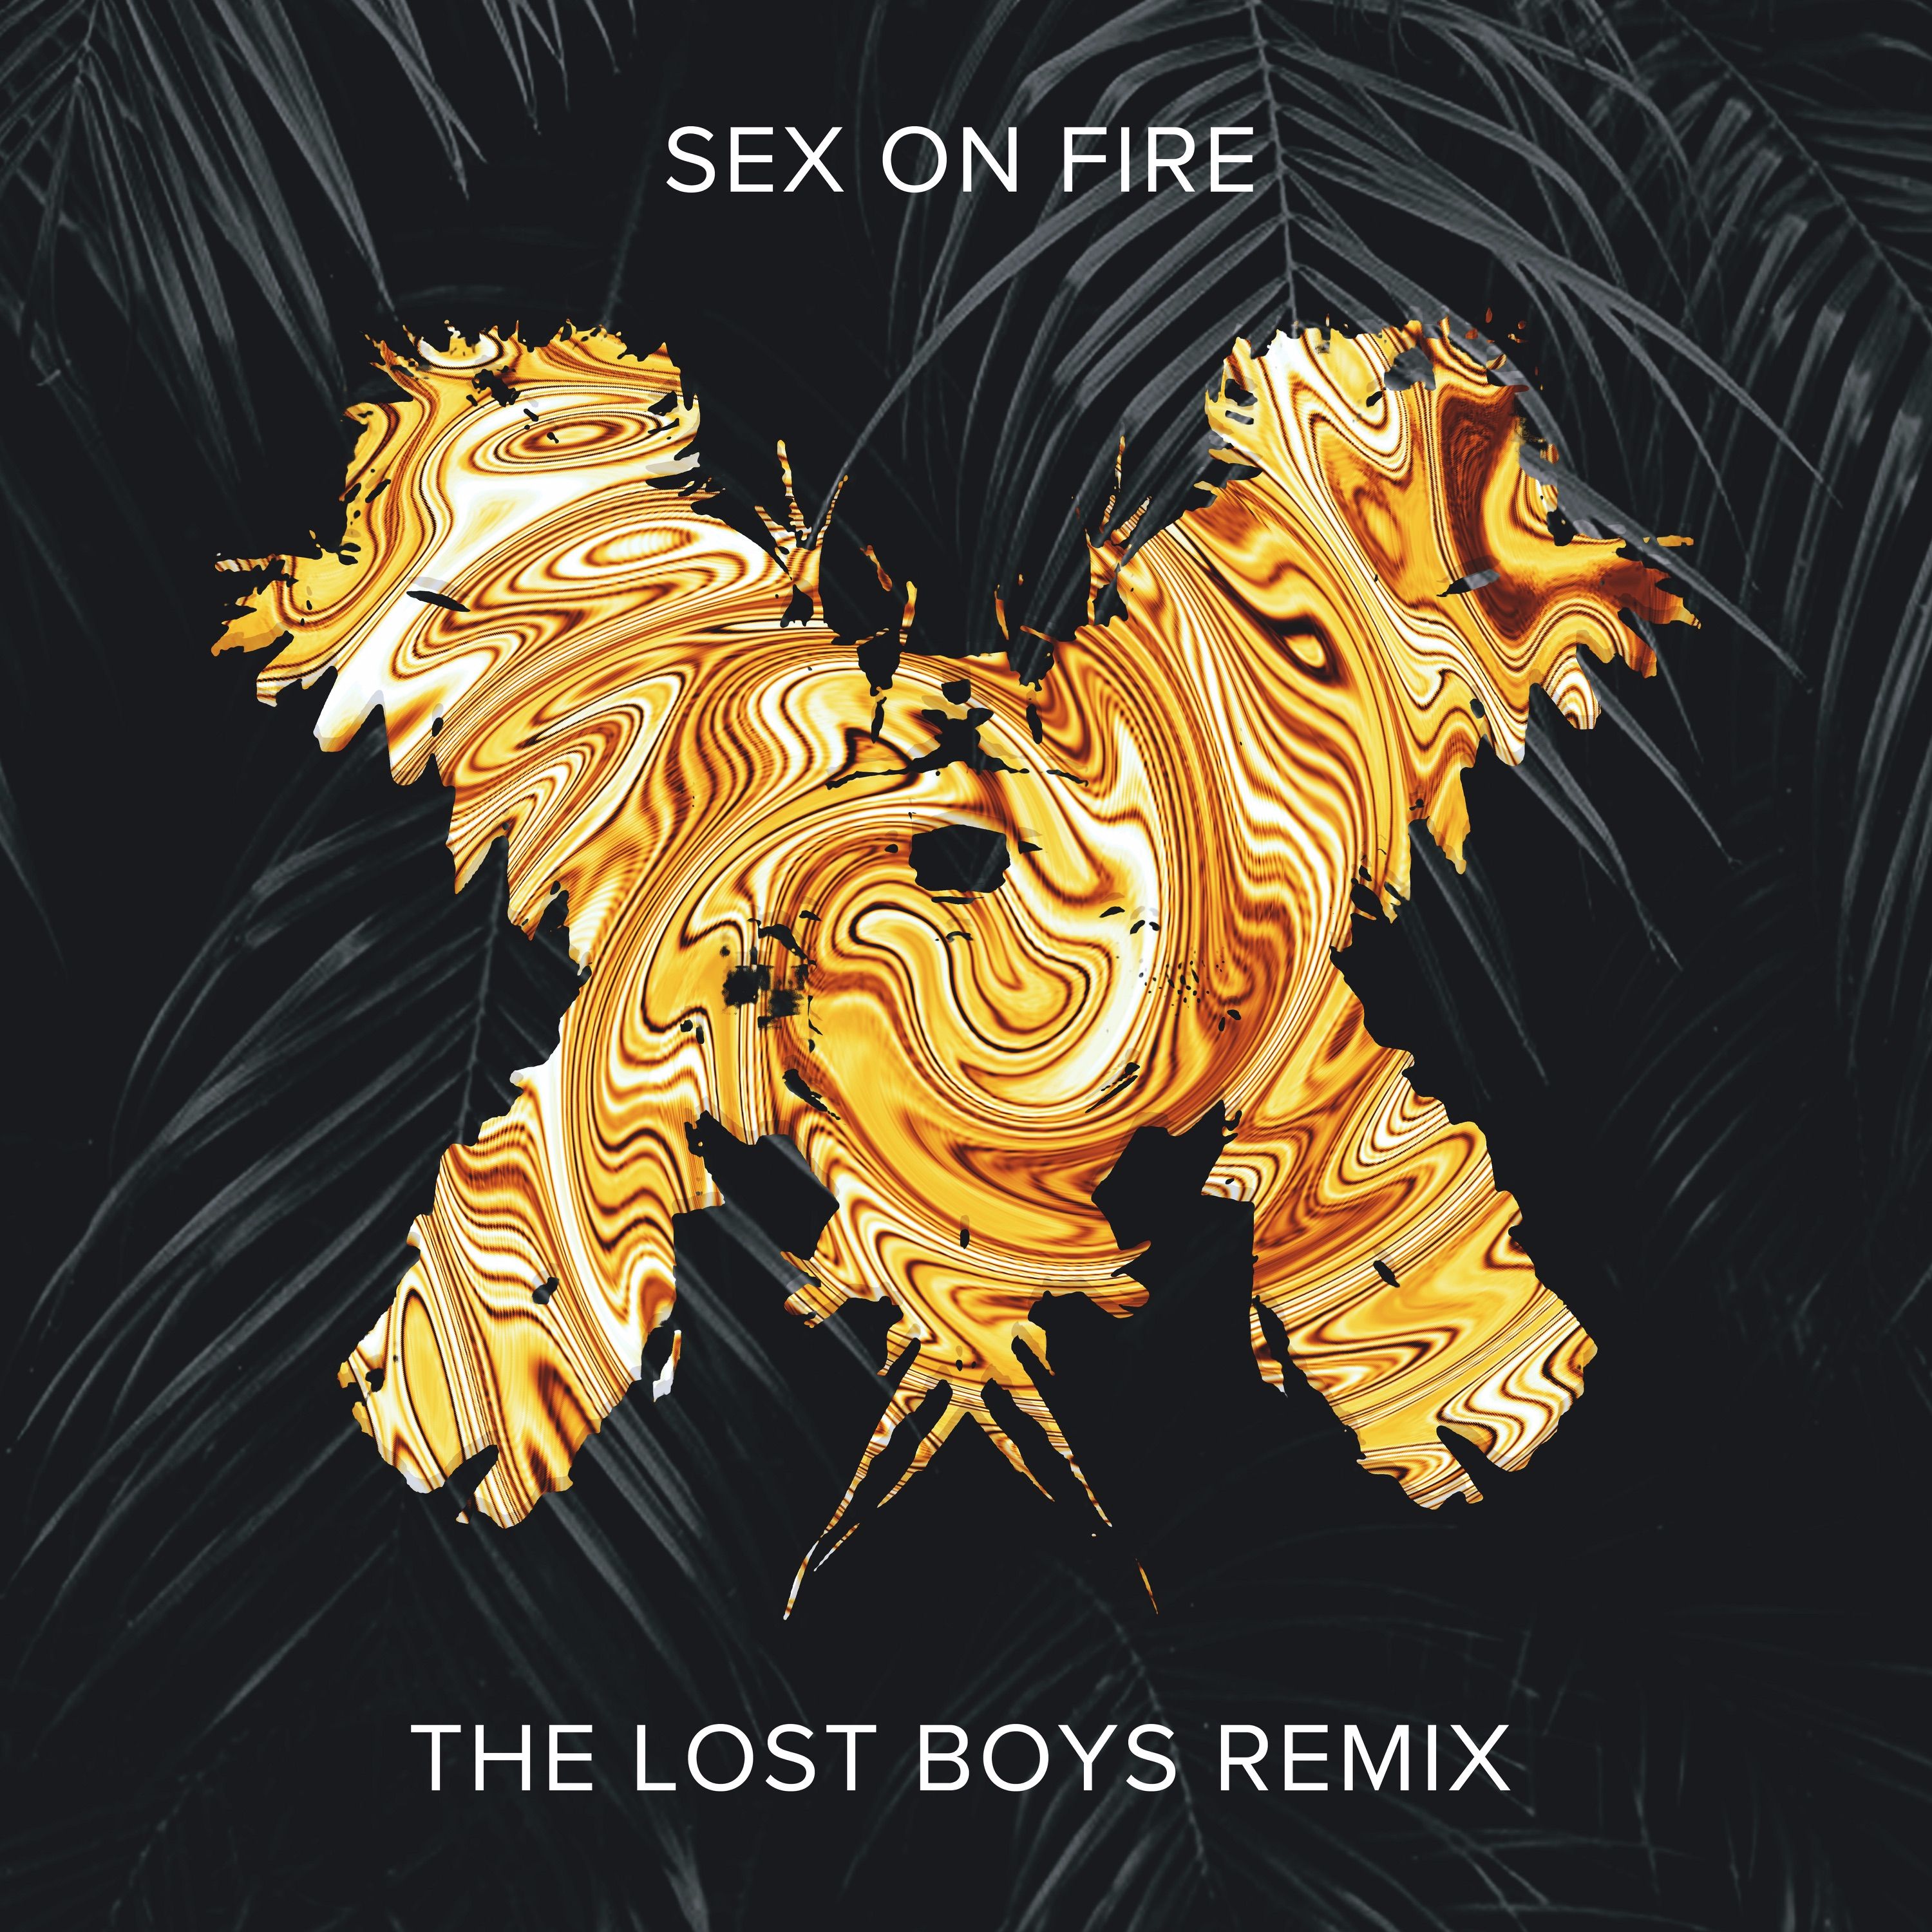 Listen to @thelostboys_tlb's future progressive remix of Kings of Leon...